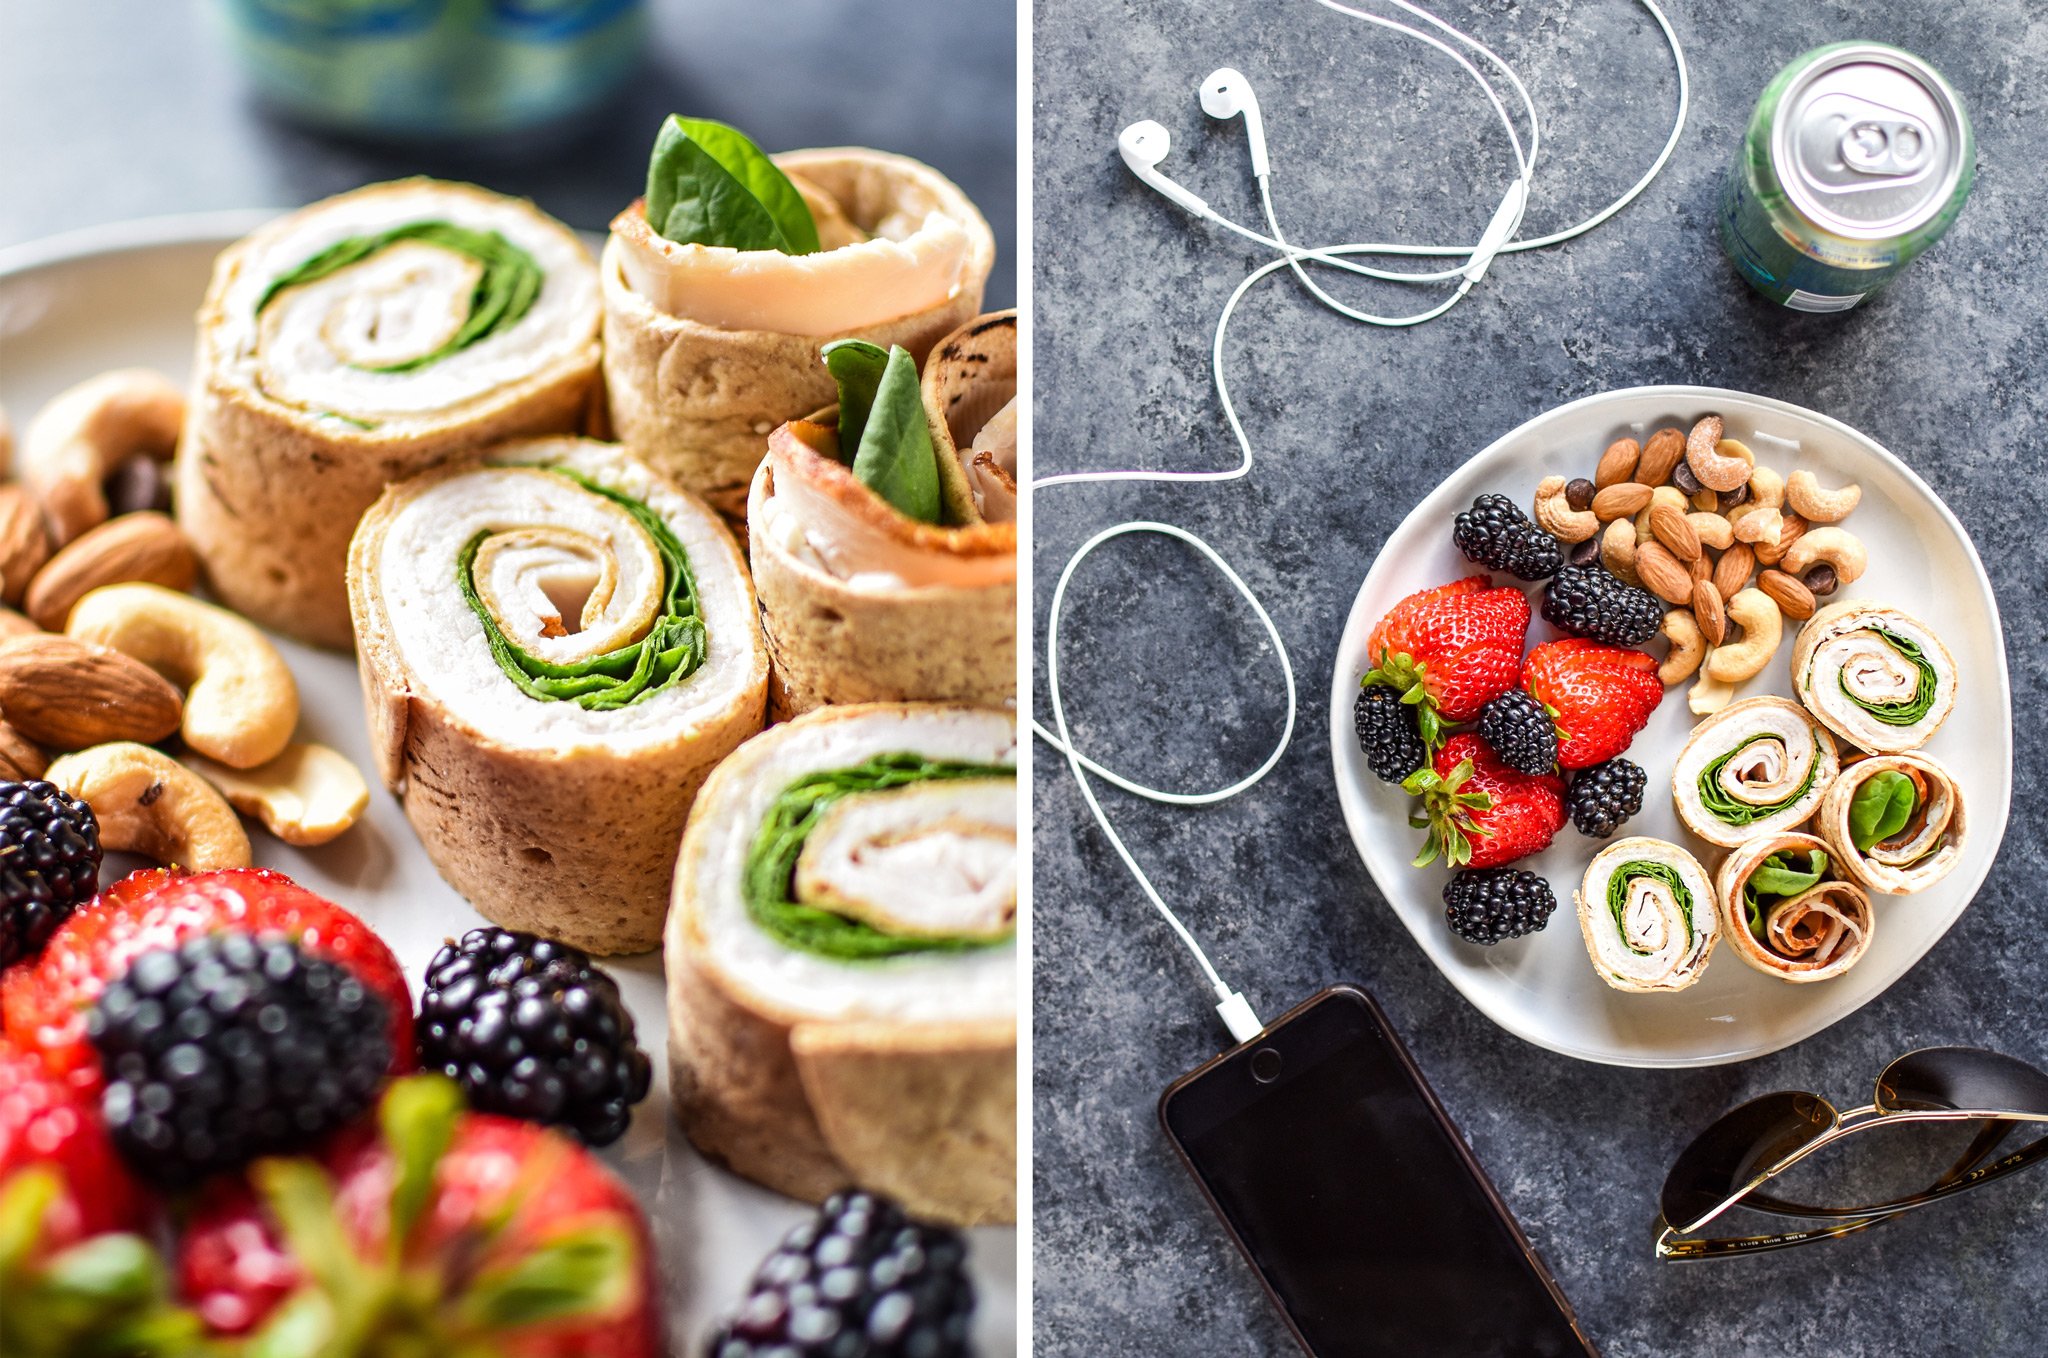 Left: Turkey pinwheels on a place with berries and nuts. Right: Top view of a lunch plate of pinwheels, nuts and fruit with a La Croix and iPhone music (summer vibes).